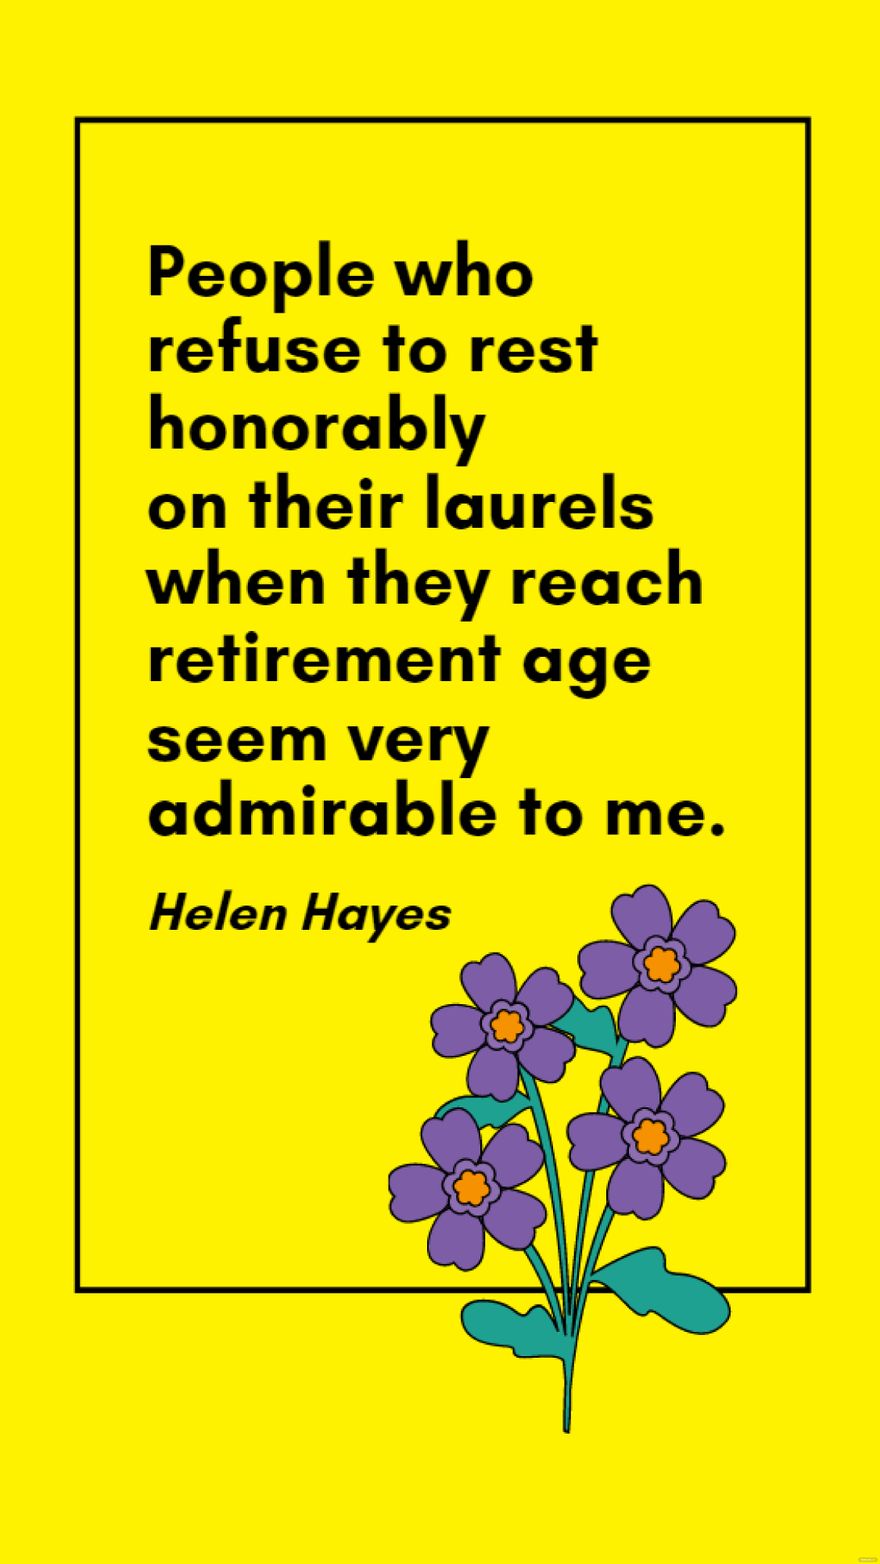 Free Helen Hayes - People who refuse to rest honorably on their laurels when they reach retirement age seem very admirable to me.